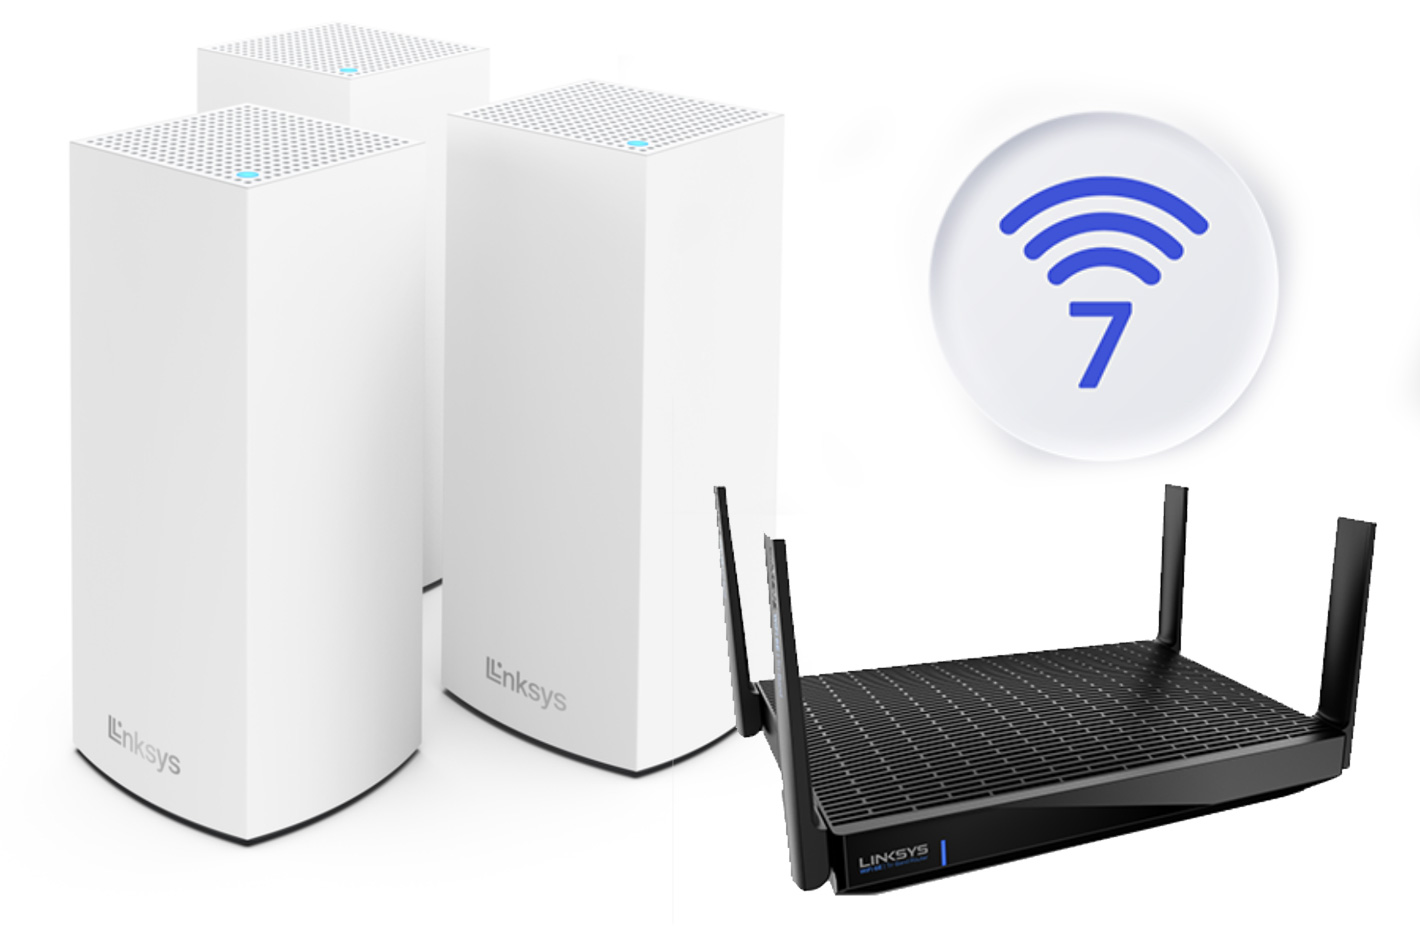 Wi-Fi 7: next-gen home routers have 80% higher capacity compared to Wi-Fi 6